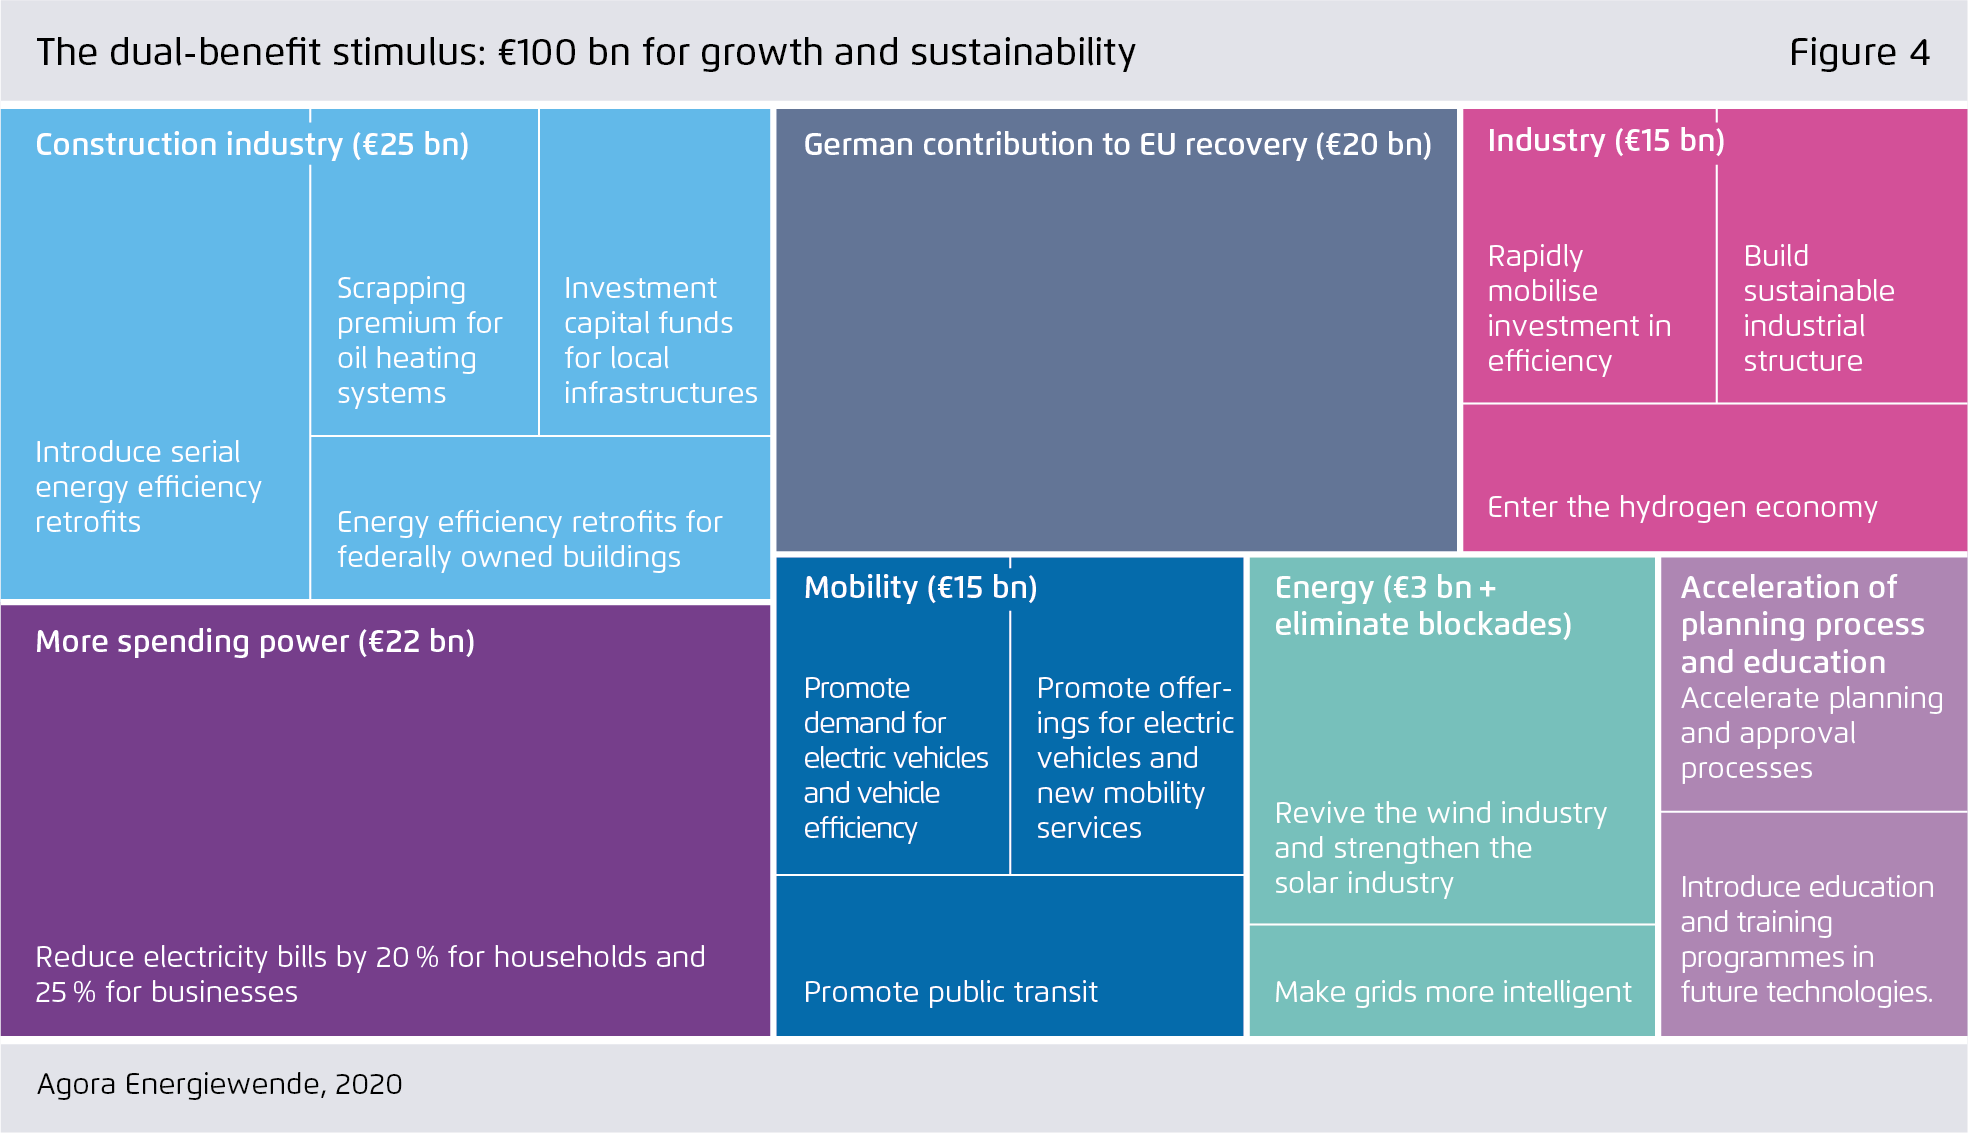 Preview for The dual-benefit stimulus: €100 bn for growth and sustainability